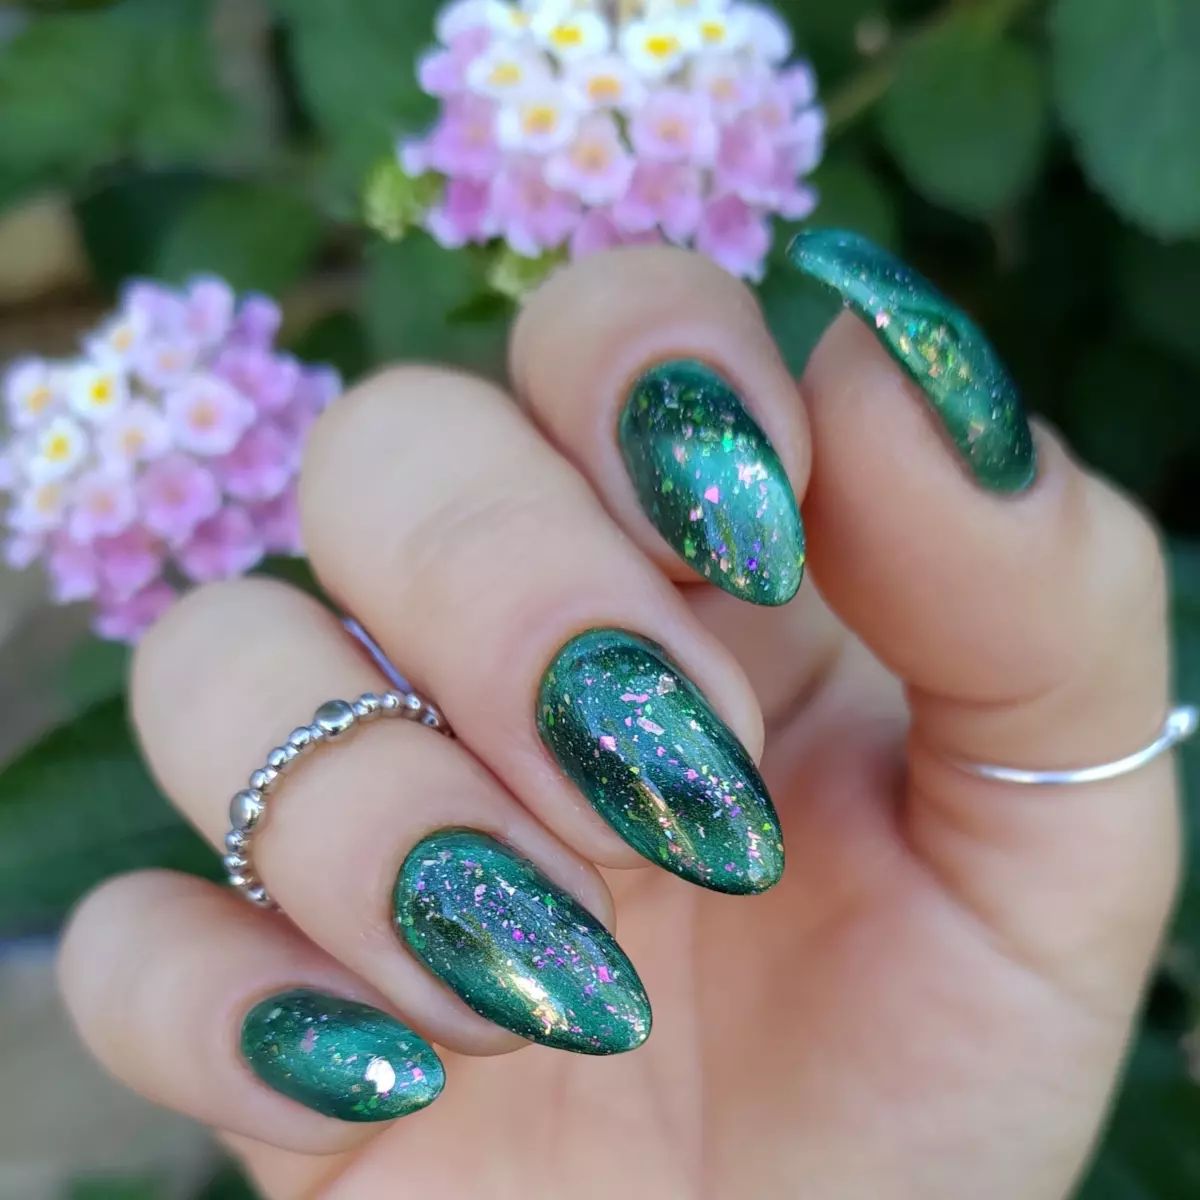 This green chrome looks amazing with all glitters on it. It can be easy to do with some specific glitters or your nail arts can do it easily.